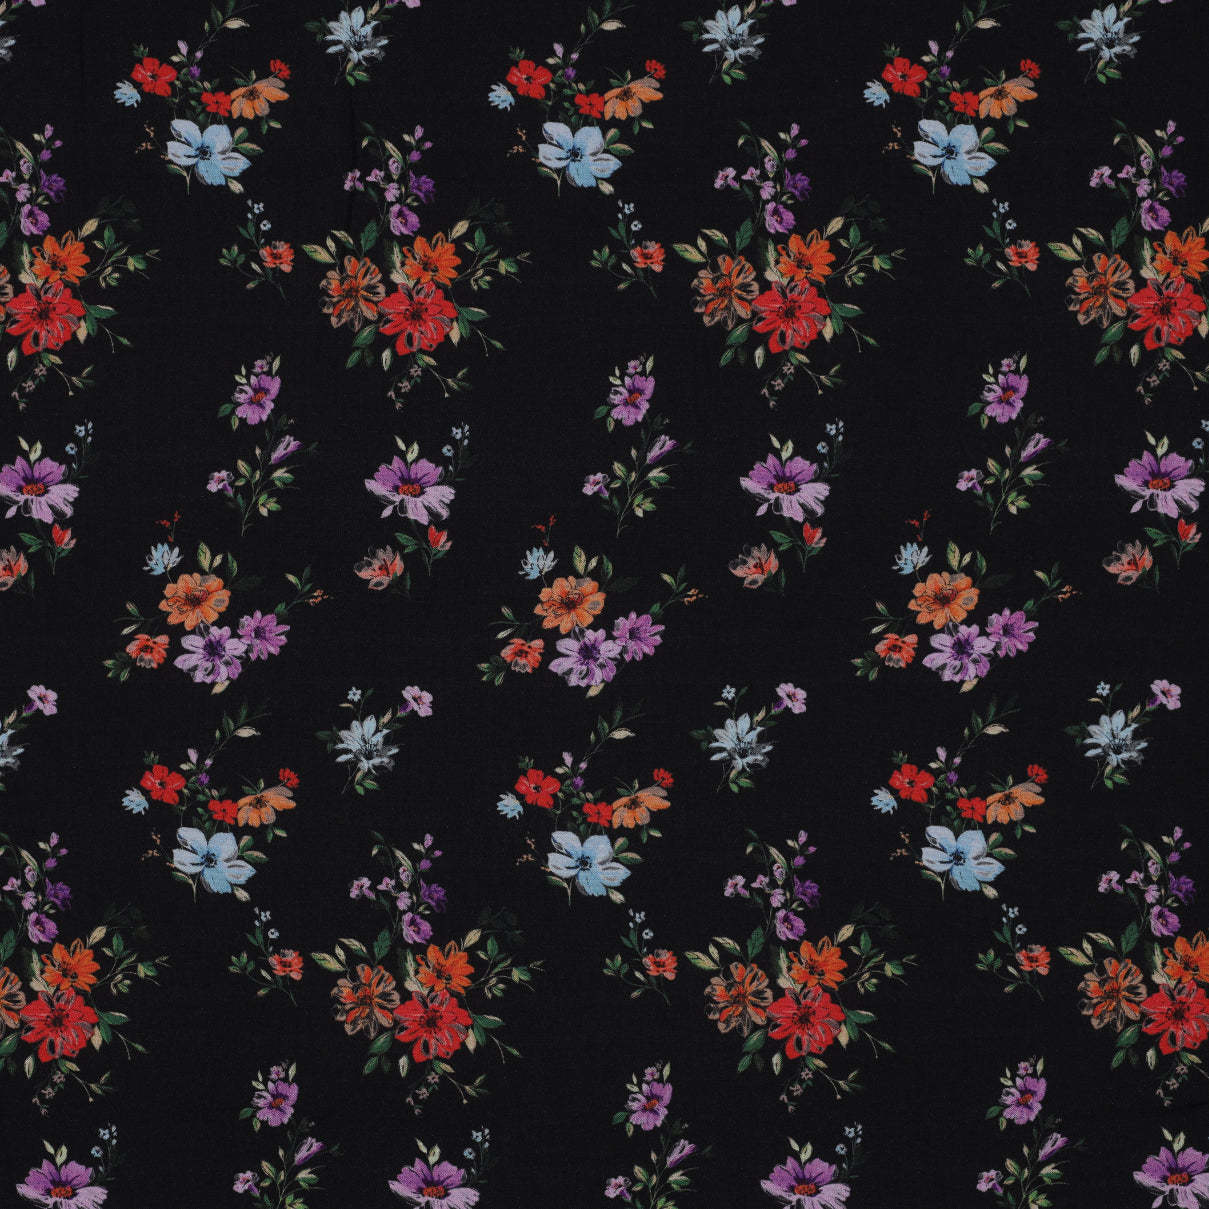 Flower Bouquets on Black Viscose Fabric